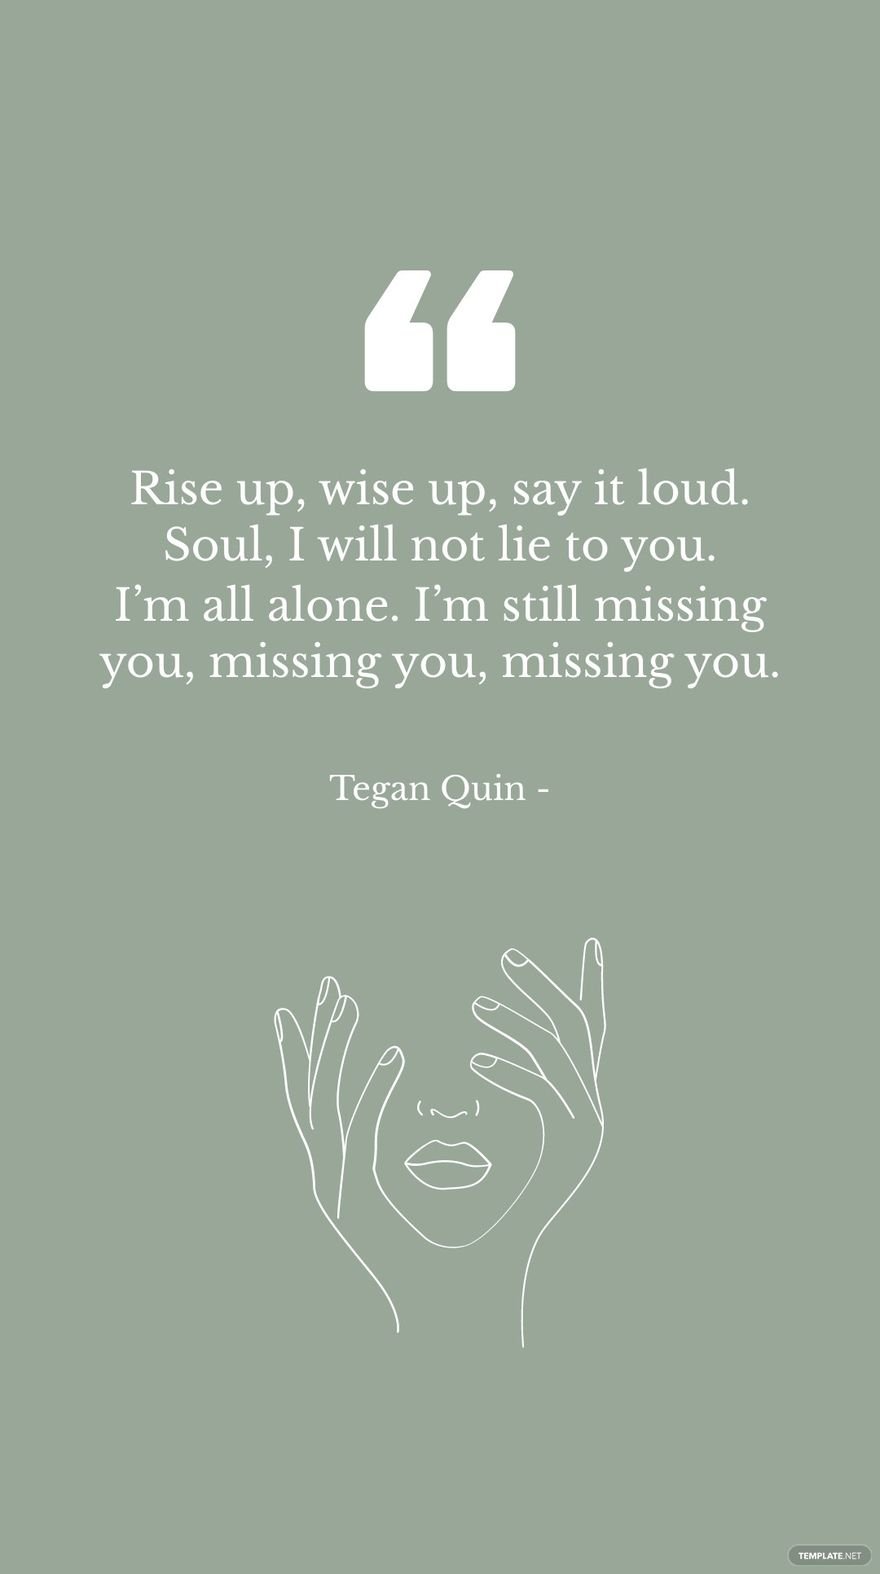 Tegan Quin - Rise up, wise up, say it loud. Soul, I will not lie to you. I’m all alone. I’m still missing you, missing you, missing you.